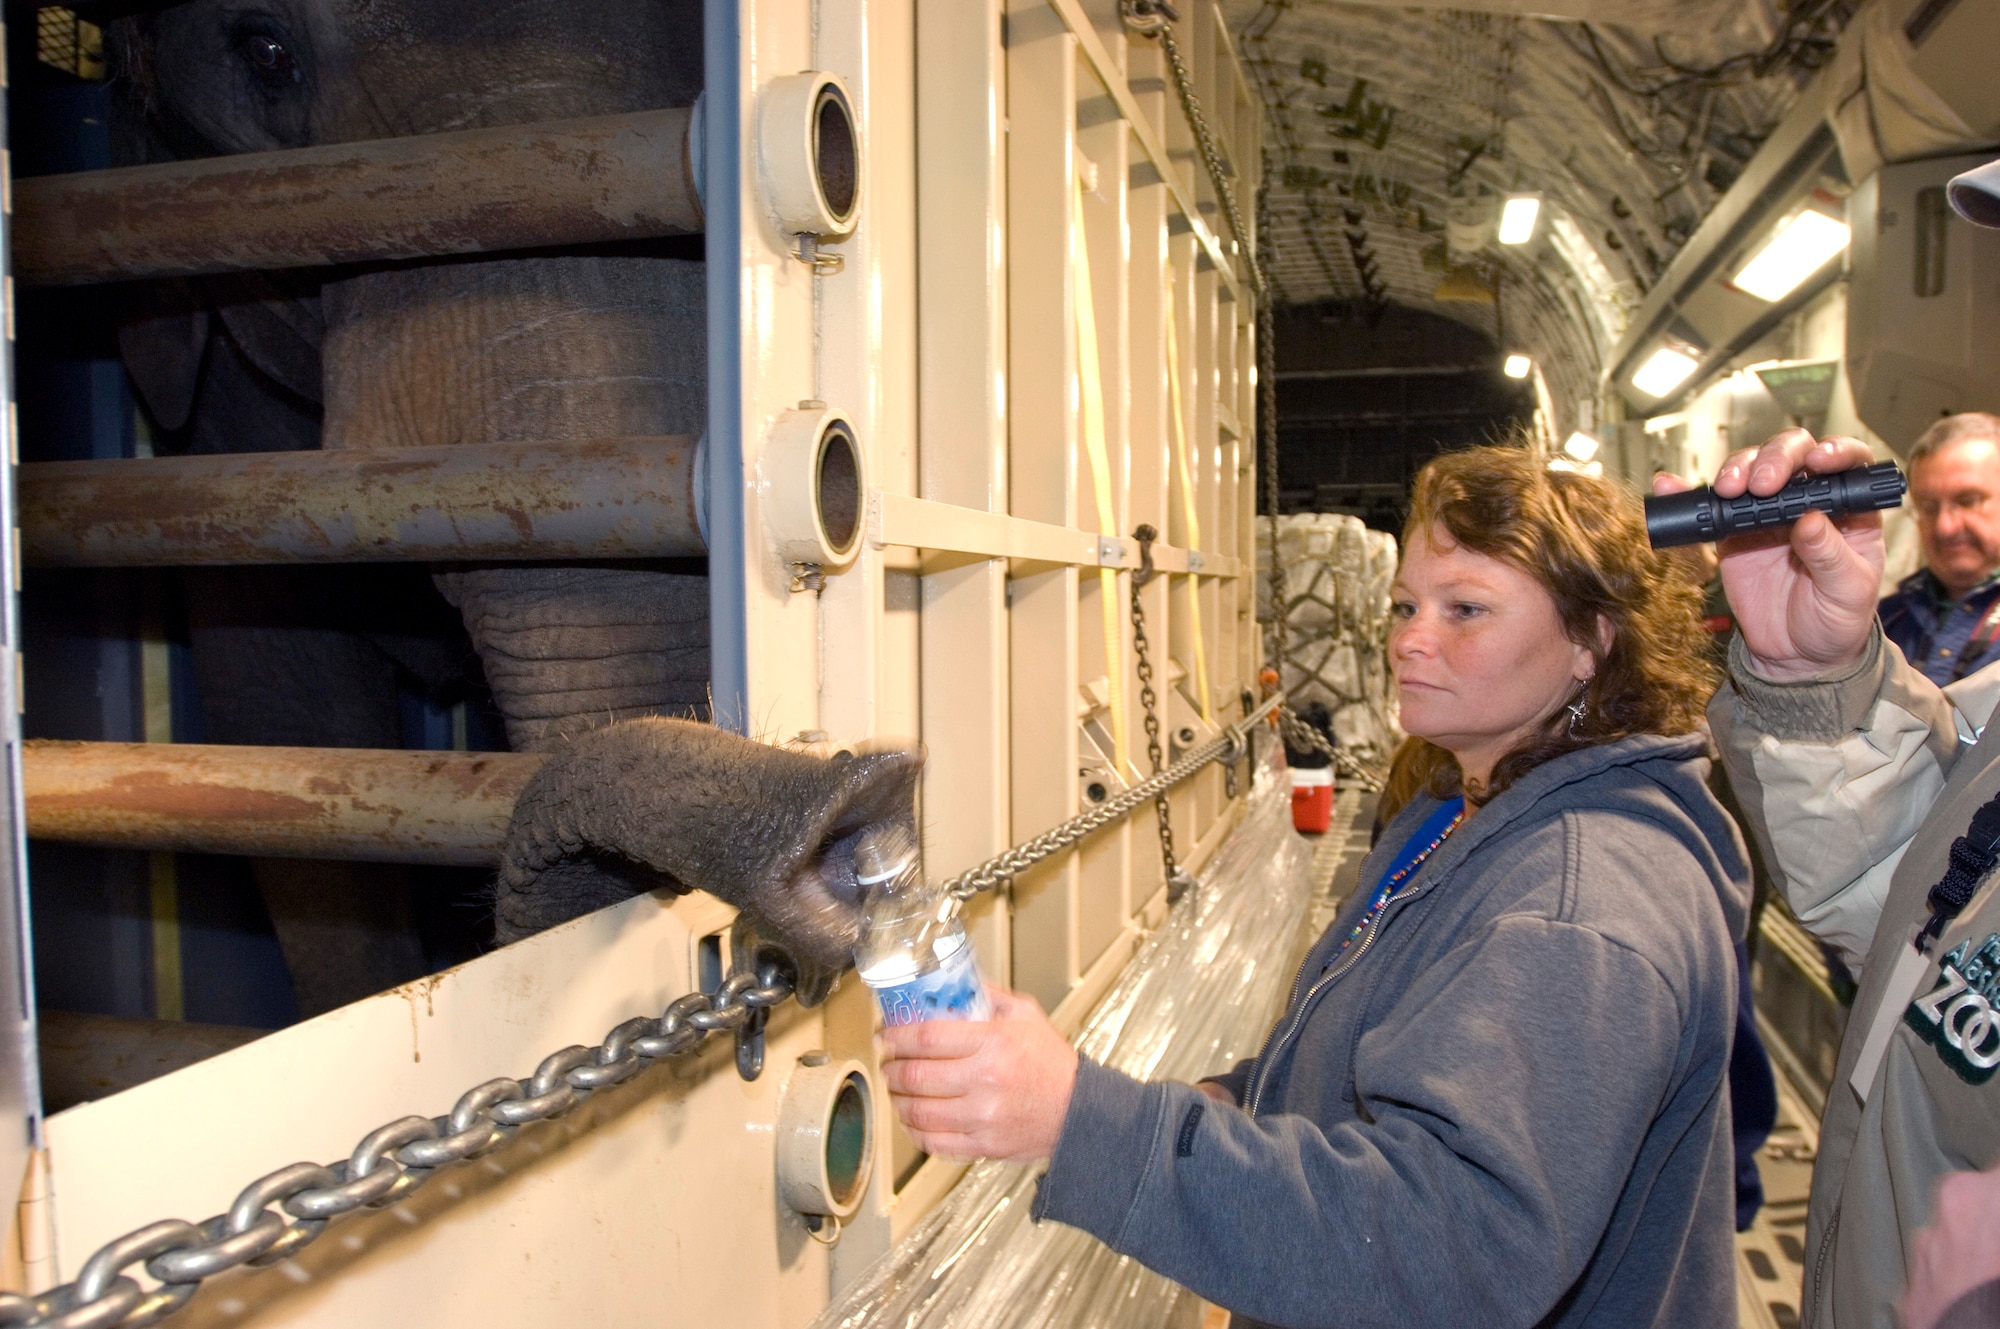 OVER THE GULF OF ALASKA -- Margaret Whittaker, an animal behavior consultant and trainer, gives Maggie water while traveling aboard a C-17 Globemaster III. Maggie is an 8,000-pound African elephant, from the Alaska Zoo and is now living at the Performing Animal Welfare Society ARK2000 Wildliek Sanctuary in California. (U.S. Air Force Photo by Tech. Sgt. Keith Brown)